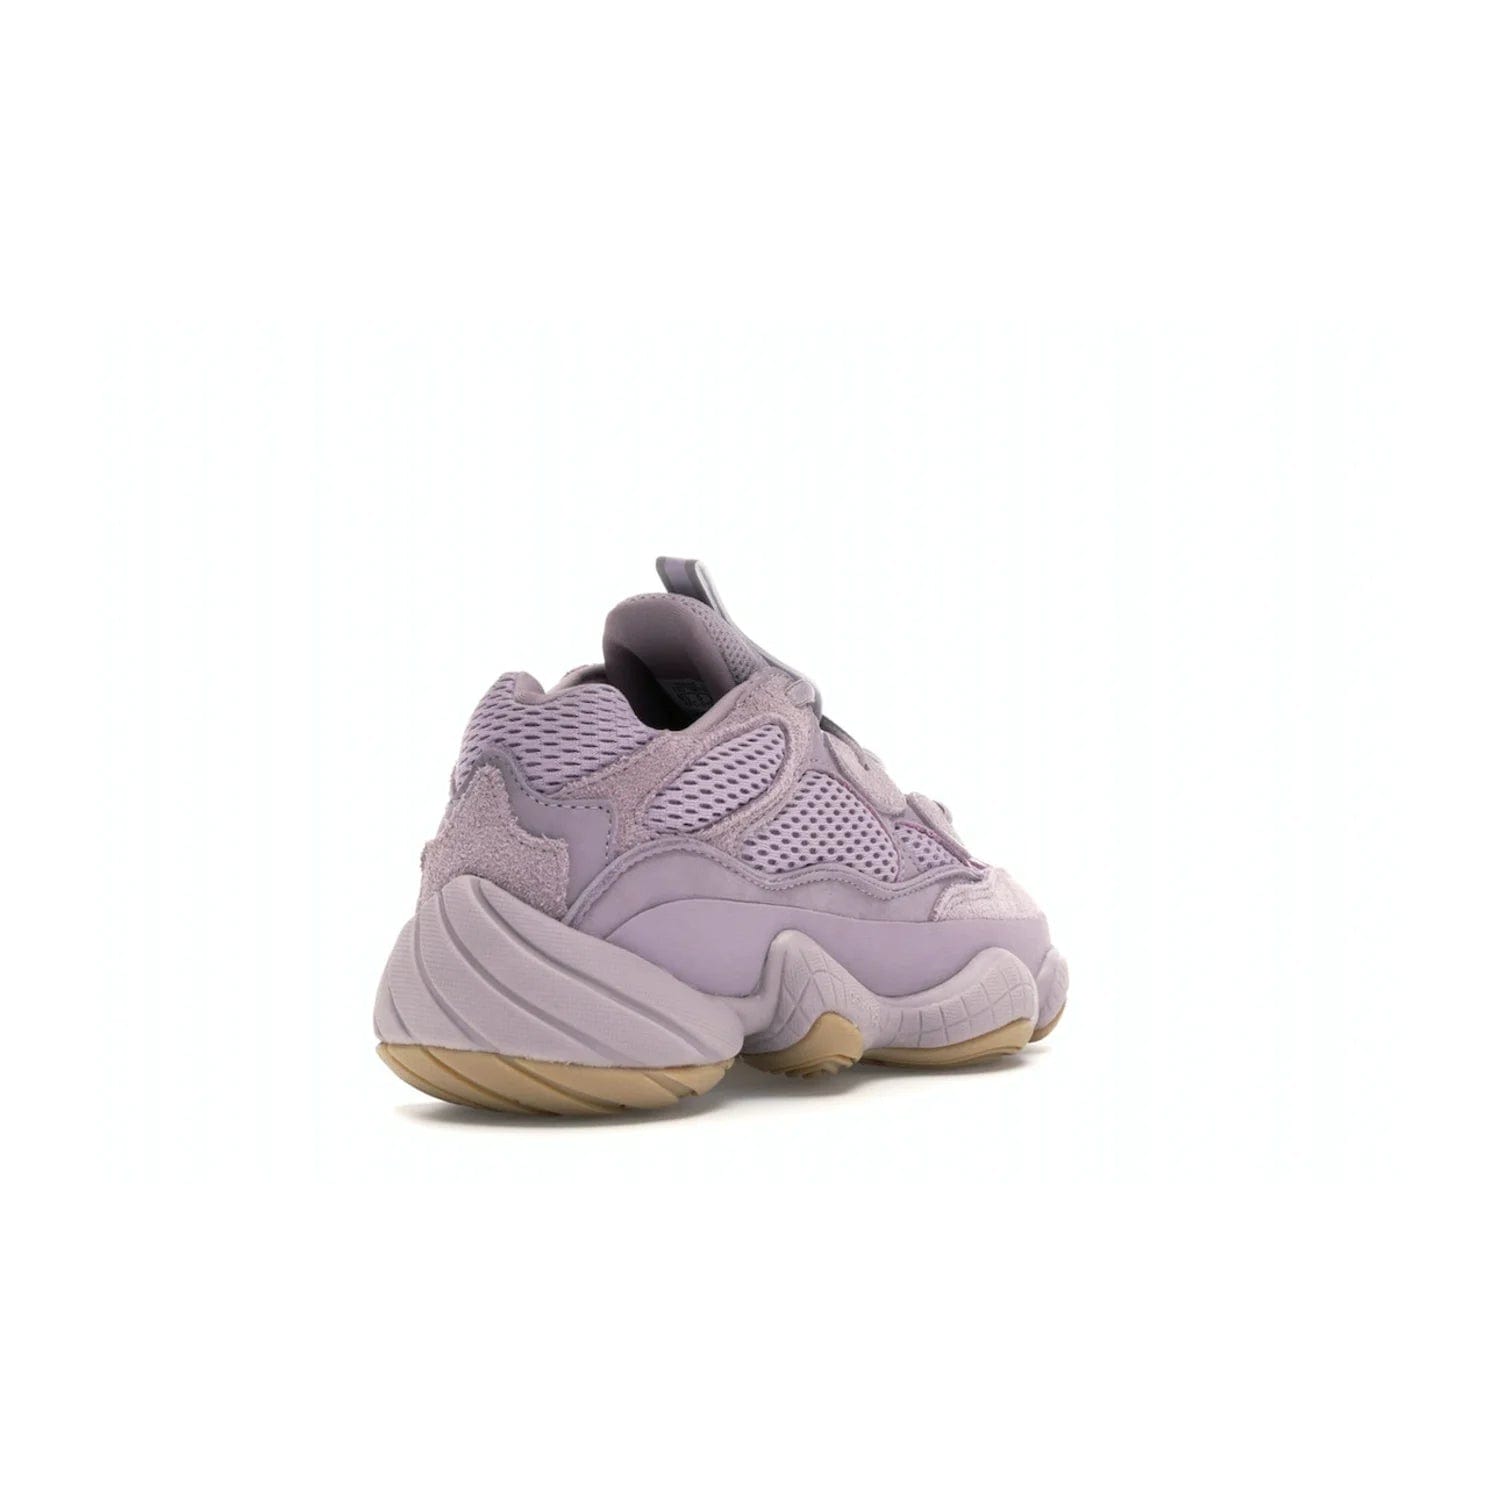 adidas Yeezy 500 Soft Vision - Image 31 - Only at www.BallersClubKickz.com - New adidas Yeezy 500 Soft Vision sneaker featuring a combination of mesh, leather, and suede in a classic Soft Vision colorway. Gum rubber outsole ensures durability and traction. An everyday sneaker that stands out from the crowd.